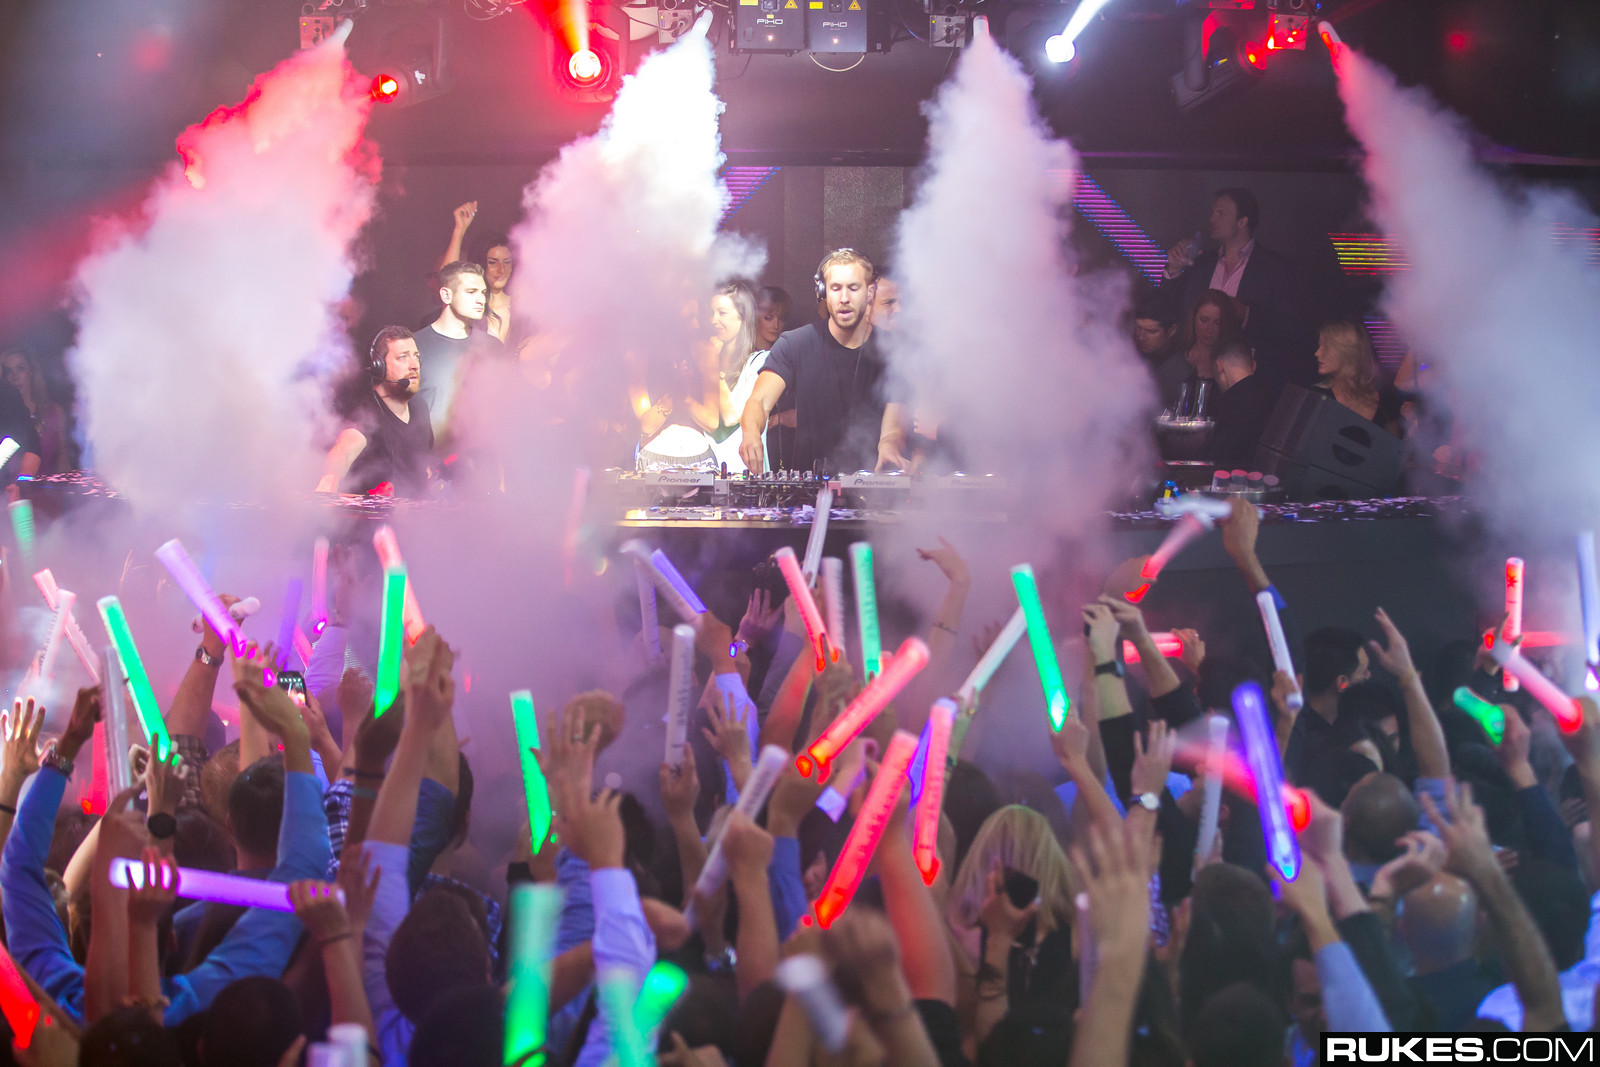 ALESSO in a Las Vegas Nightclub performing with Co2 Cryogenics Special Effects theatrical smoke jets from CryoFX